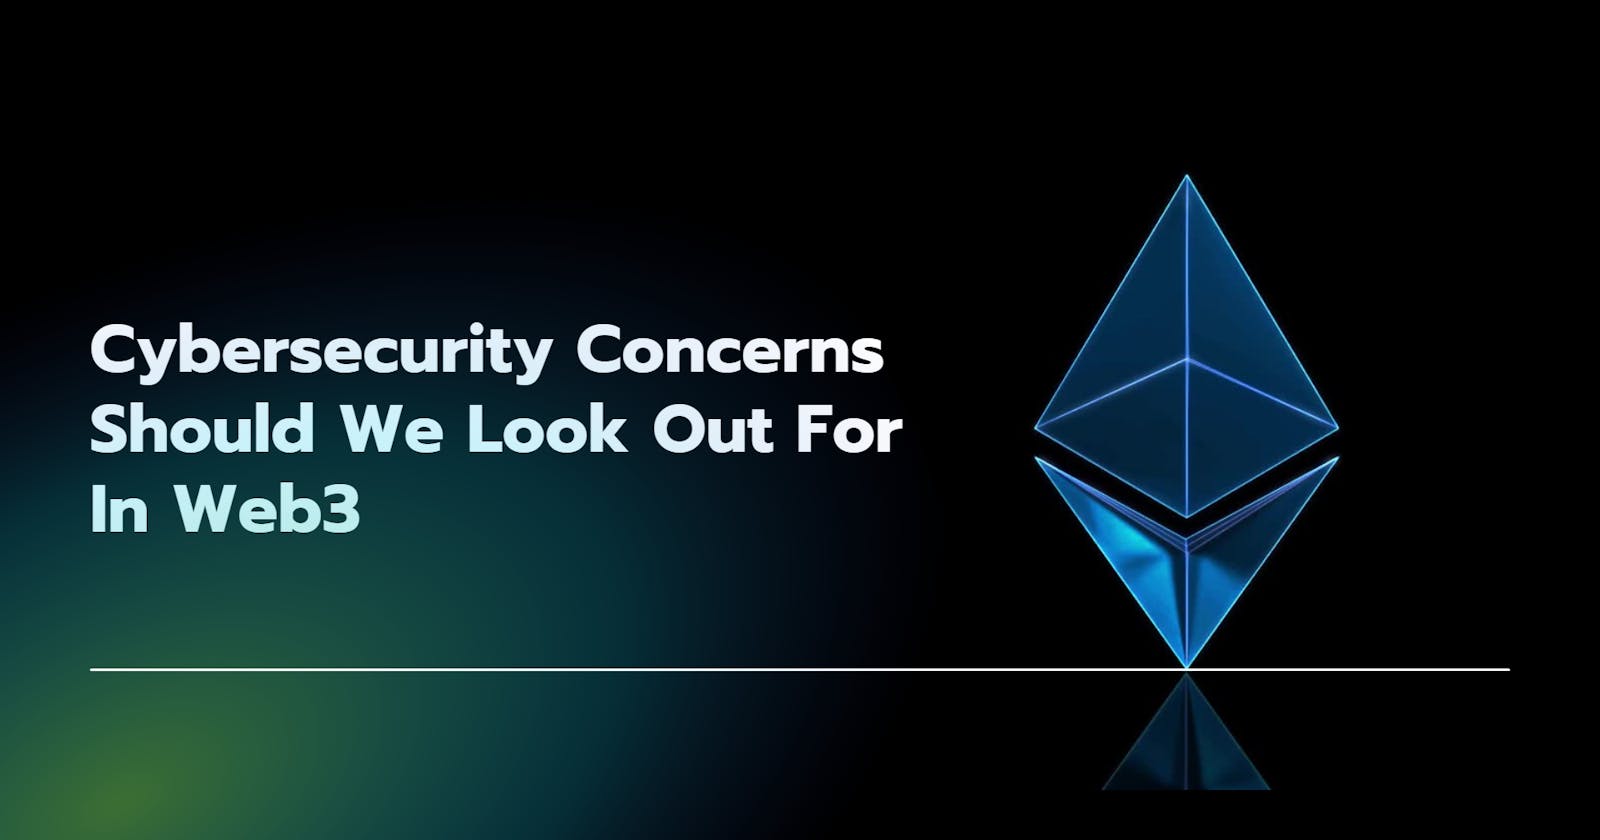 What Cybersecurity Concerns Should We Look Out For In Web3?